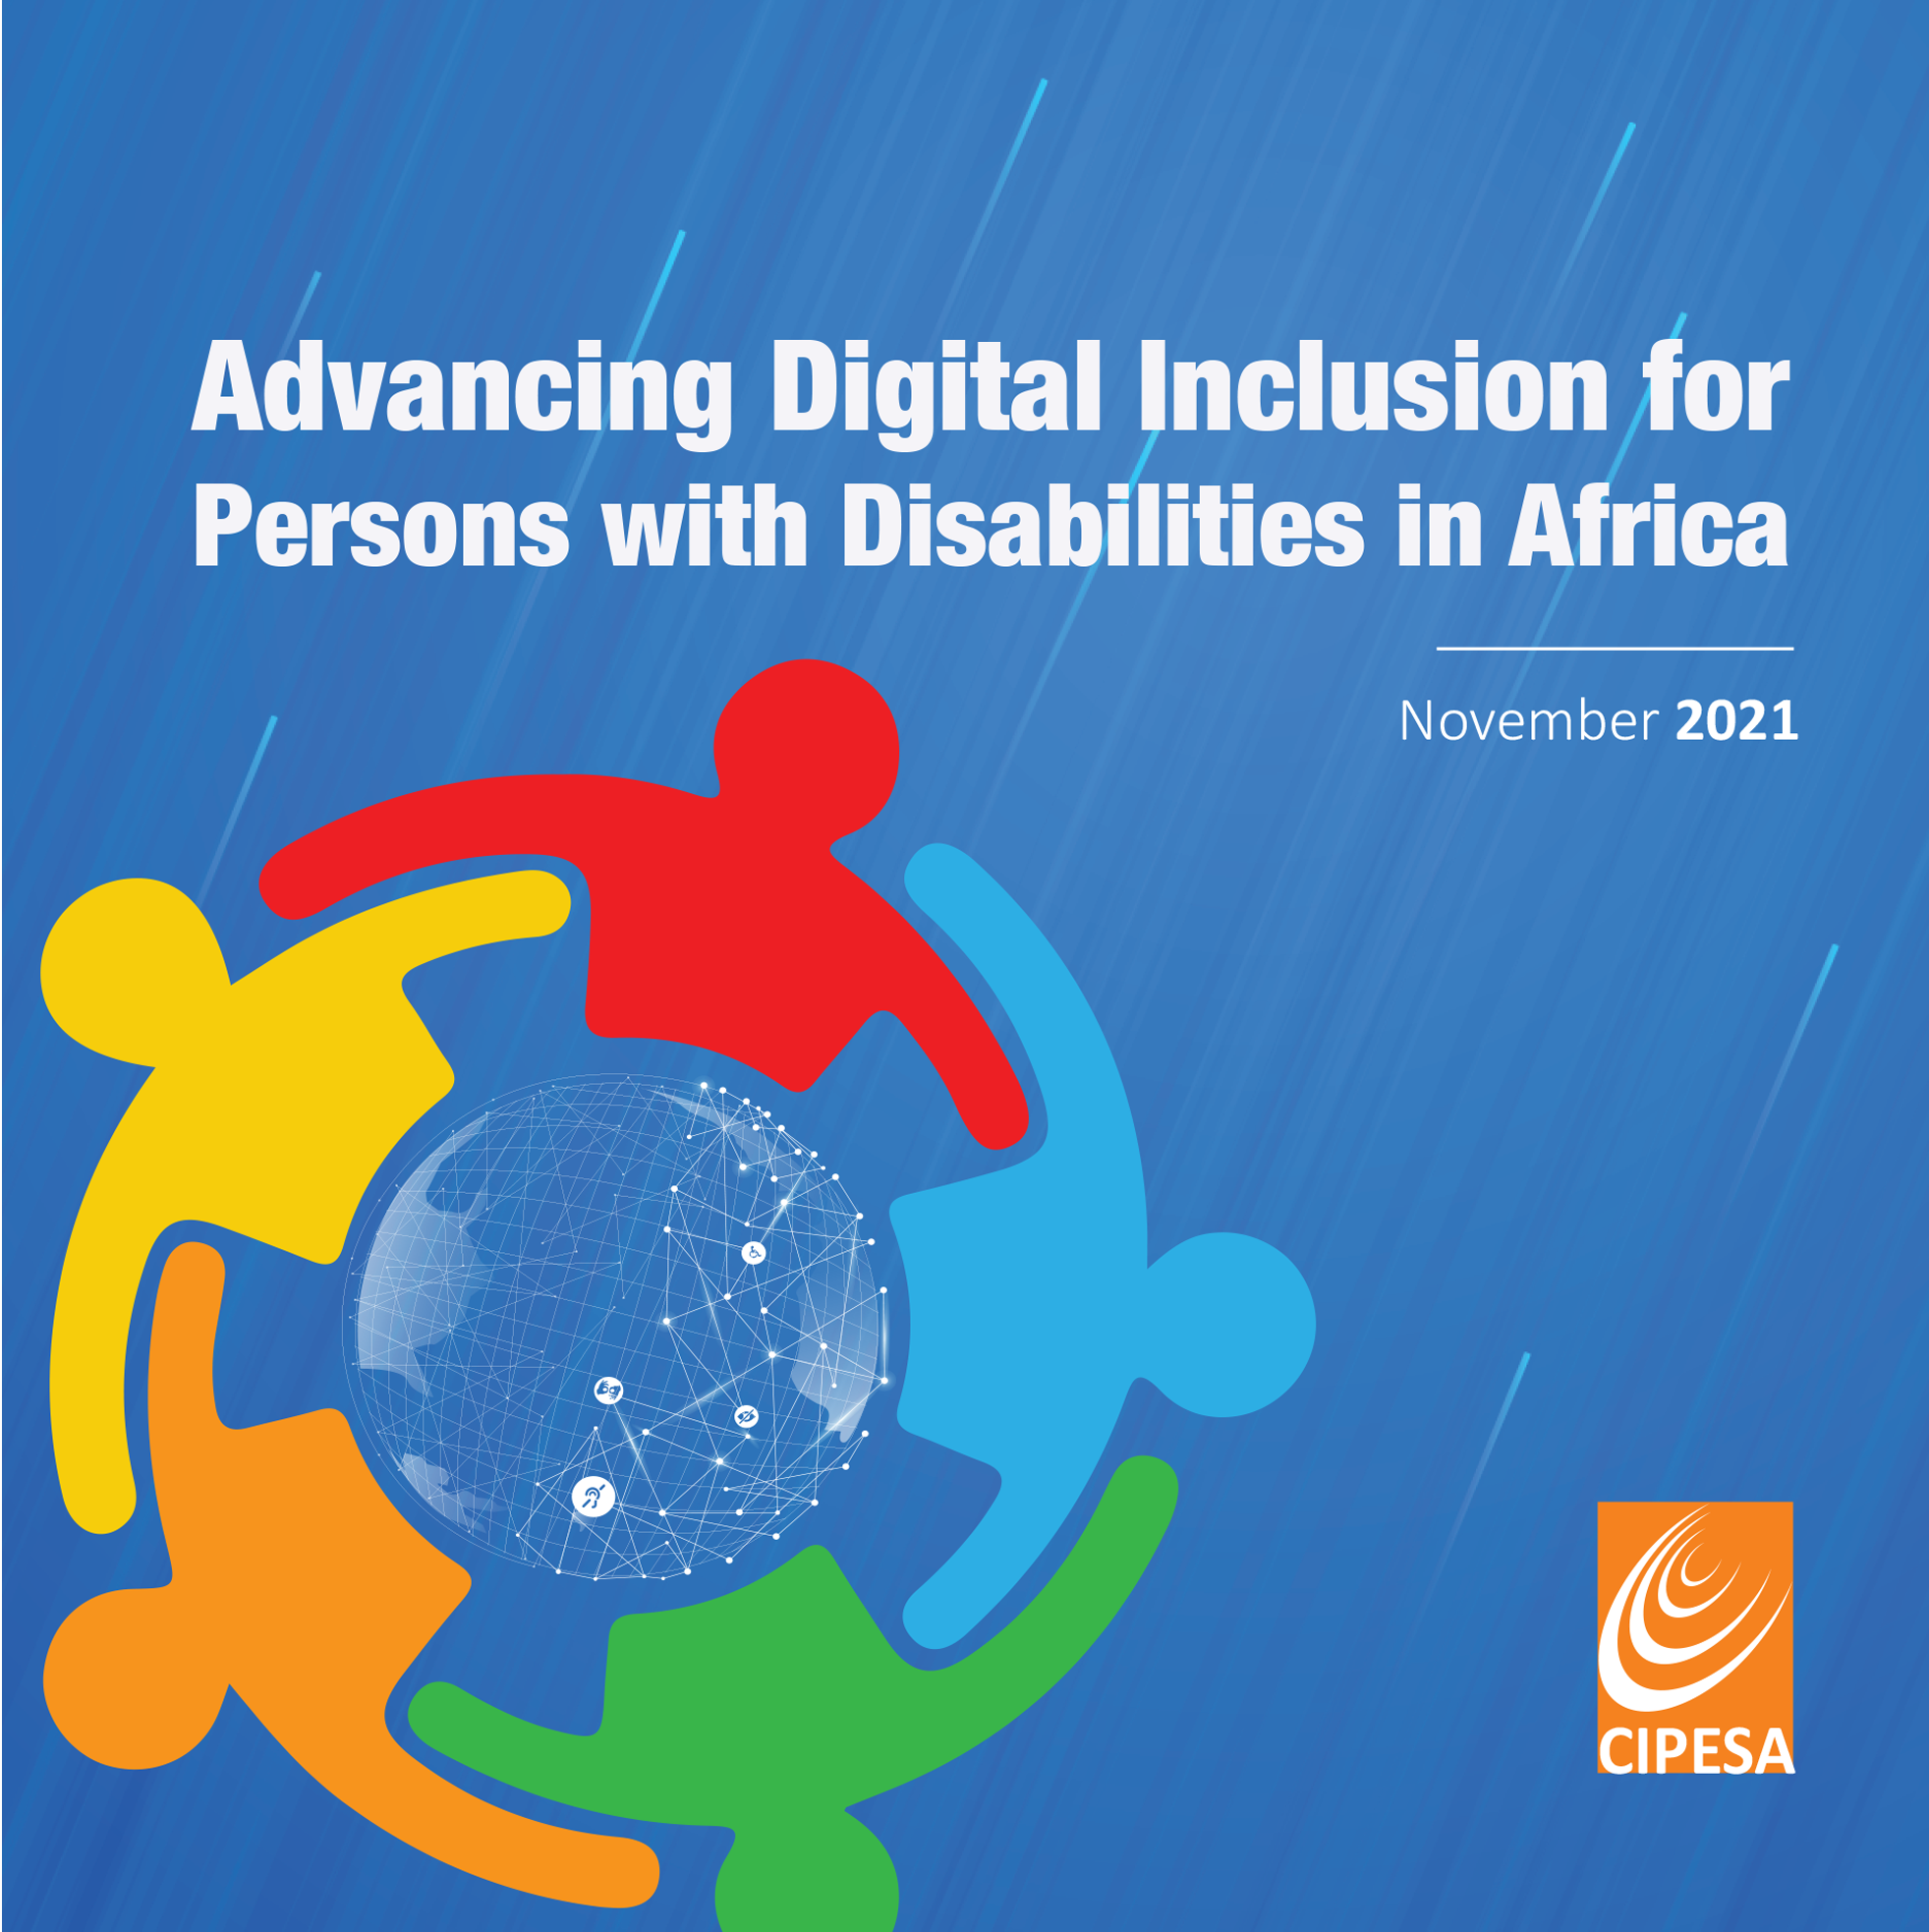 CIPESA Working On Advancing Digital Inclusion for Persons With Disabilities in Africa